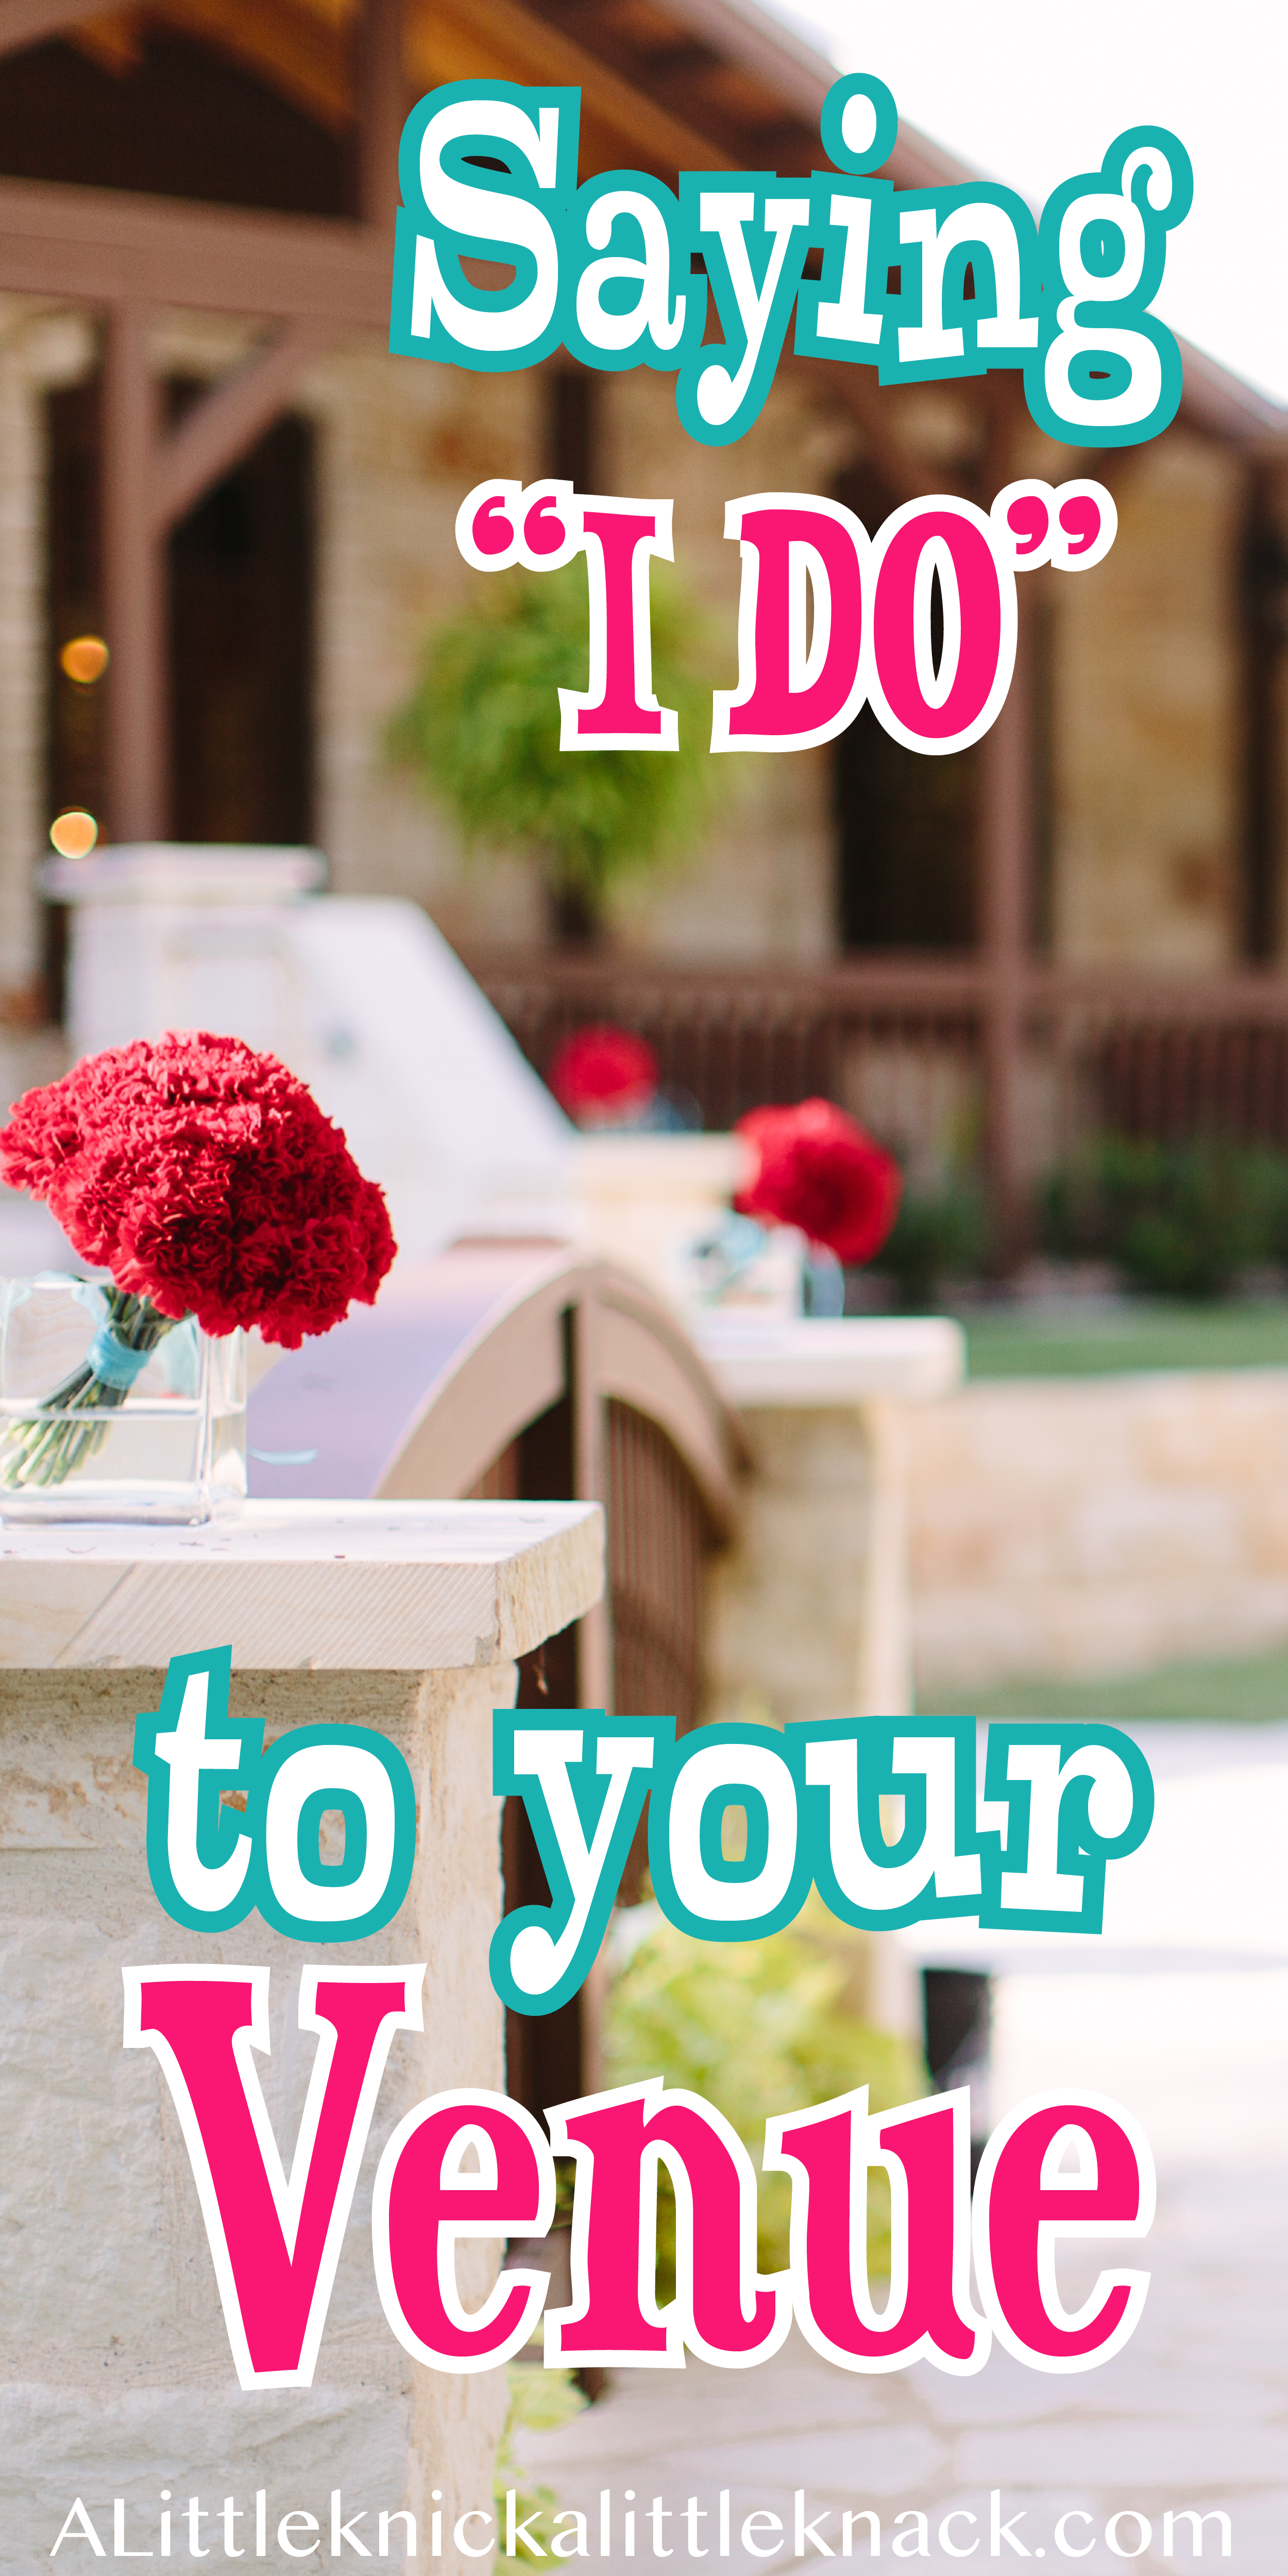 A white stone and wood wedding venue with red floral decor and a text overlay